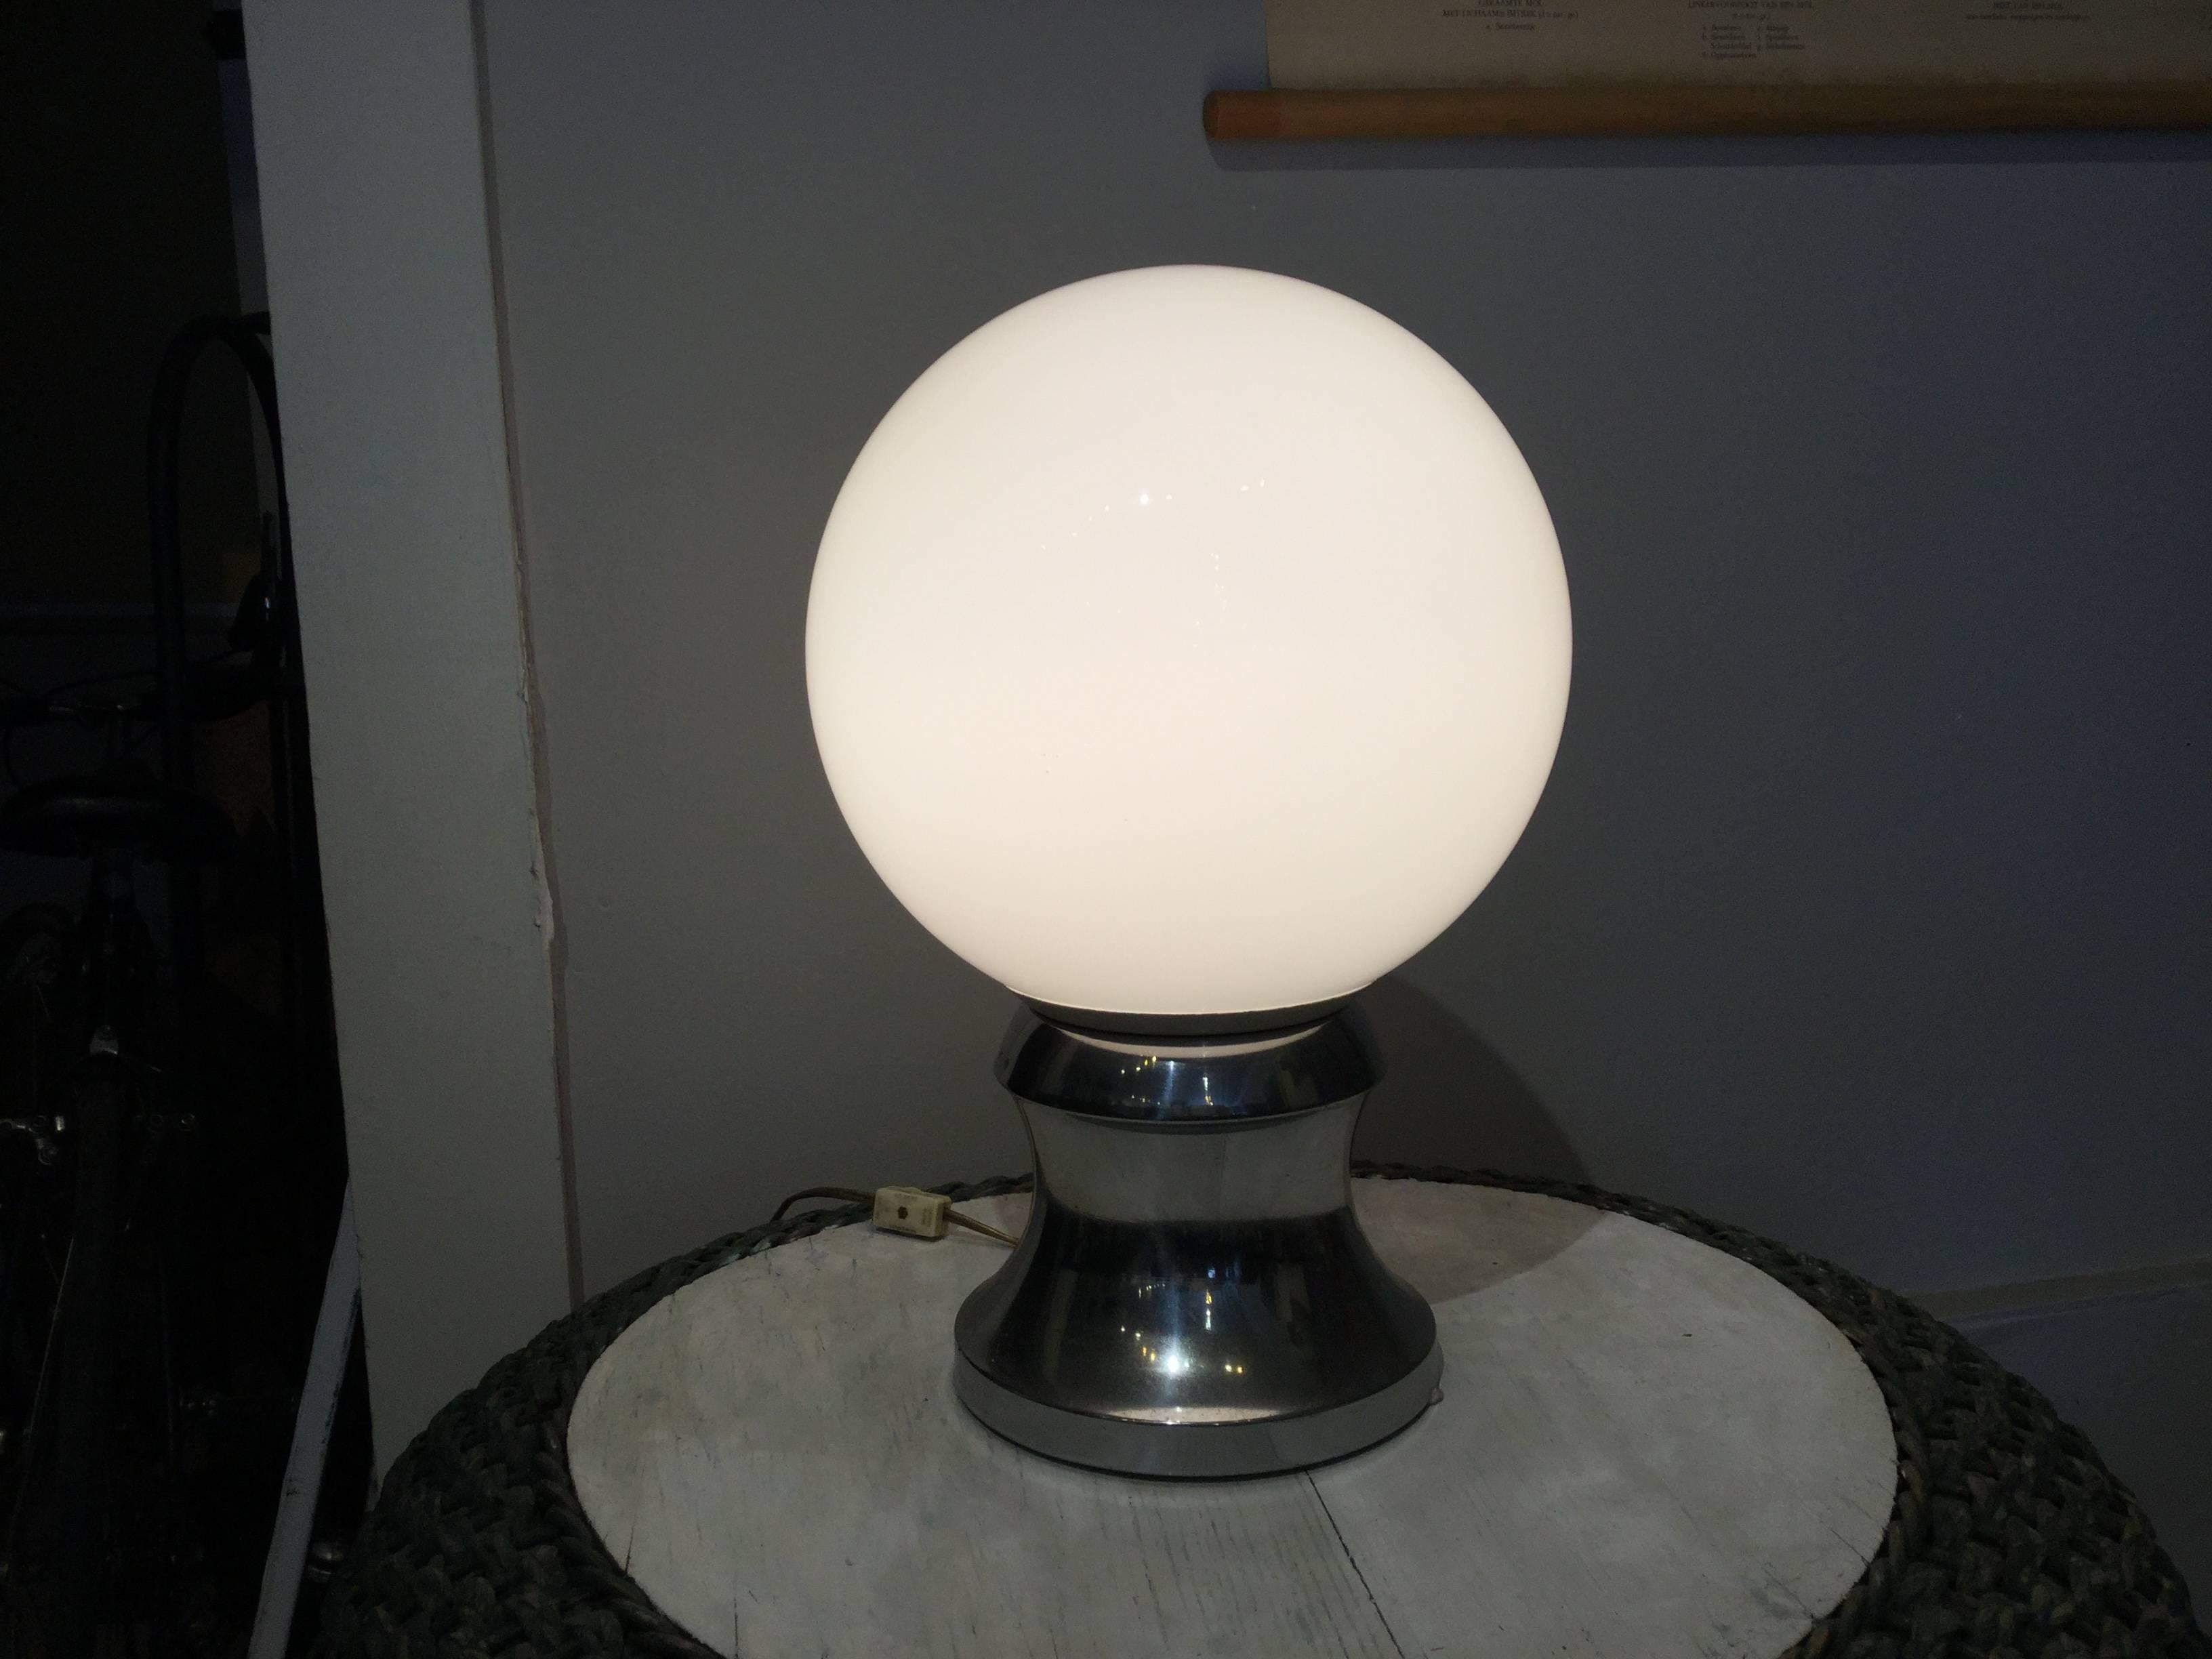 Mid-Century glass globe table lamp. Never seen of of these before. It's an interesting piece with a chrome base and switch on the cord. Looks great on a table!